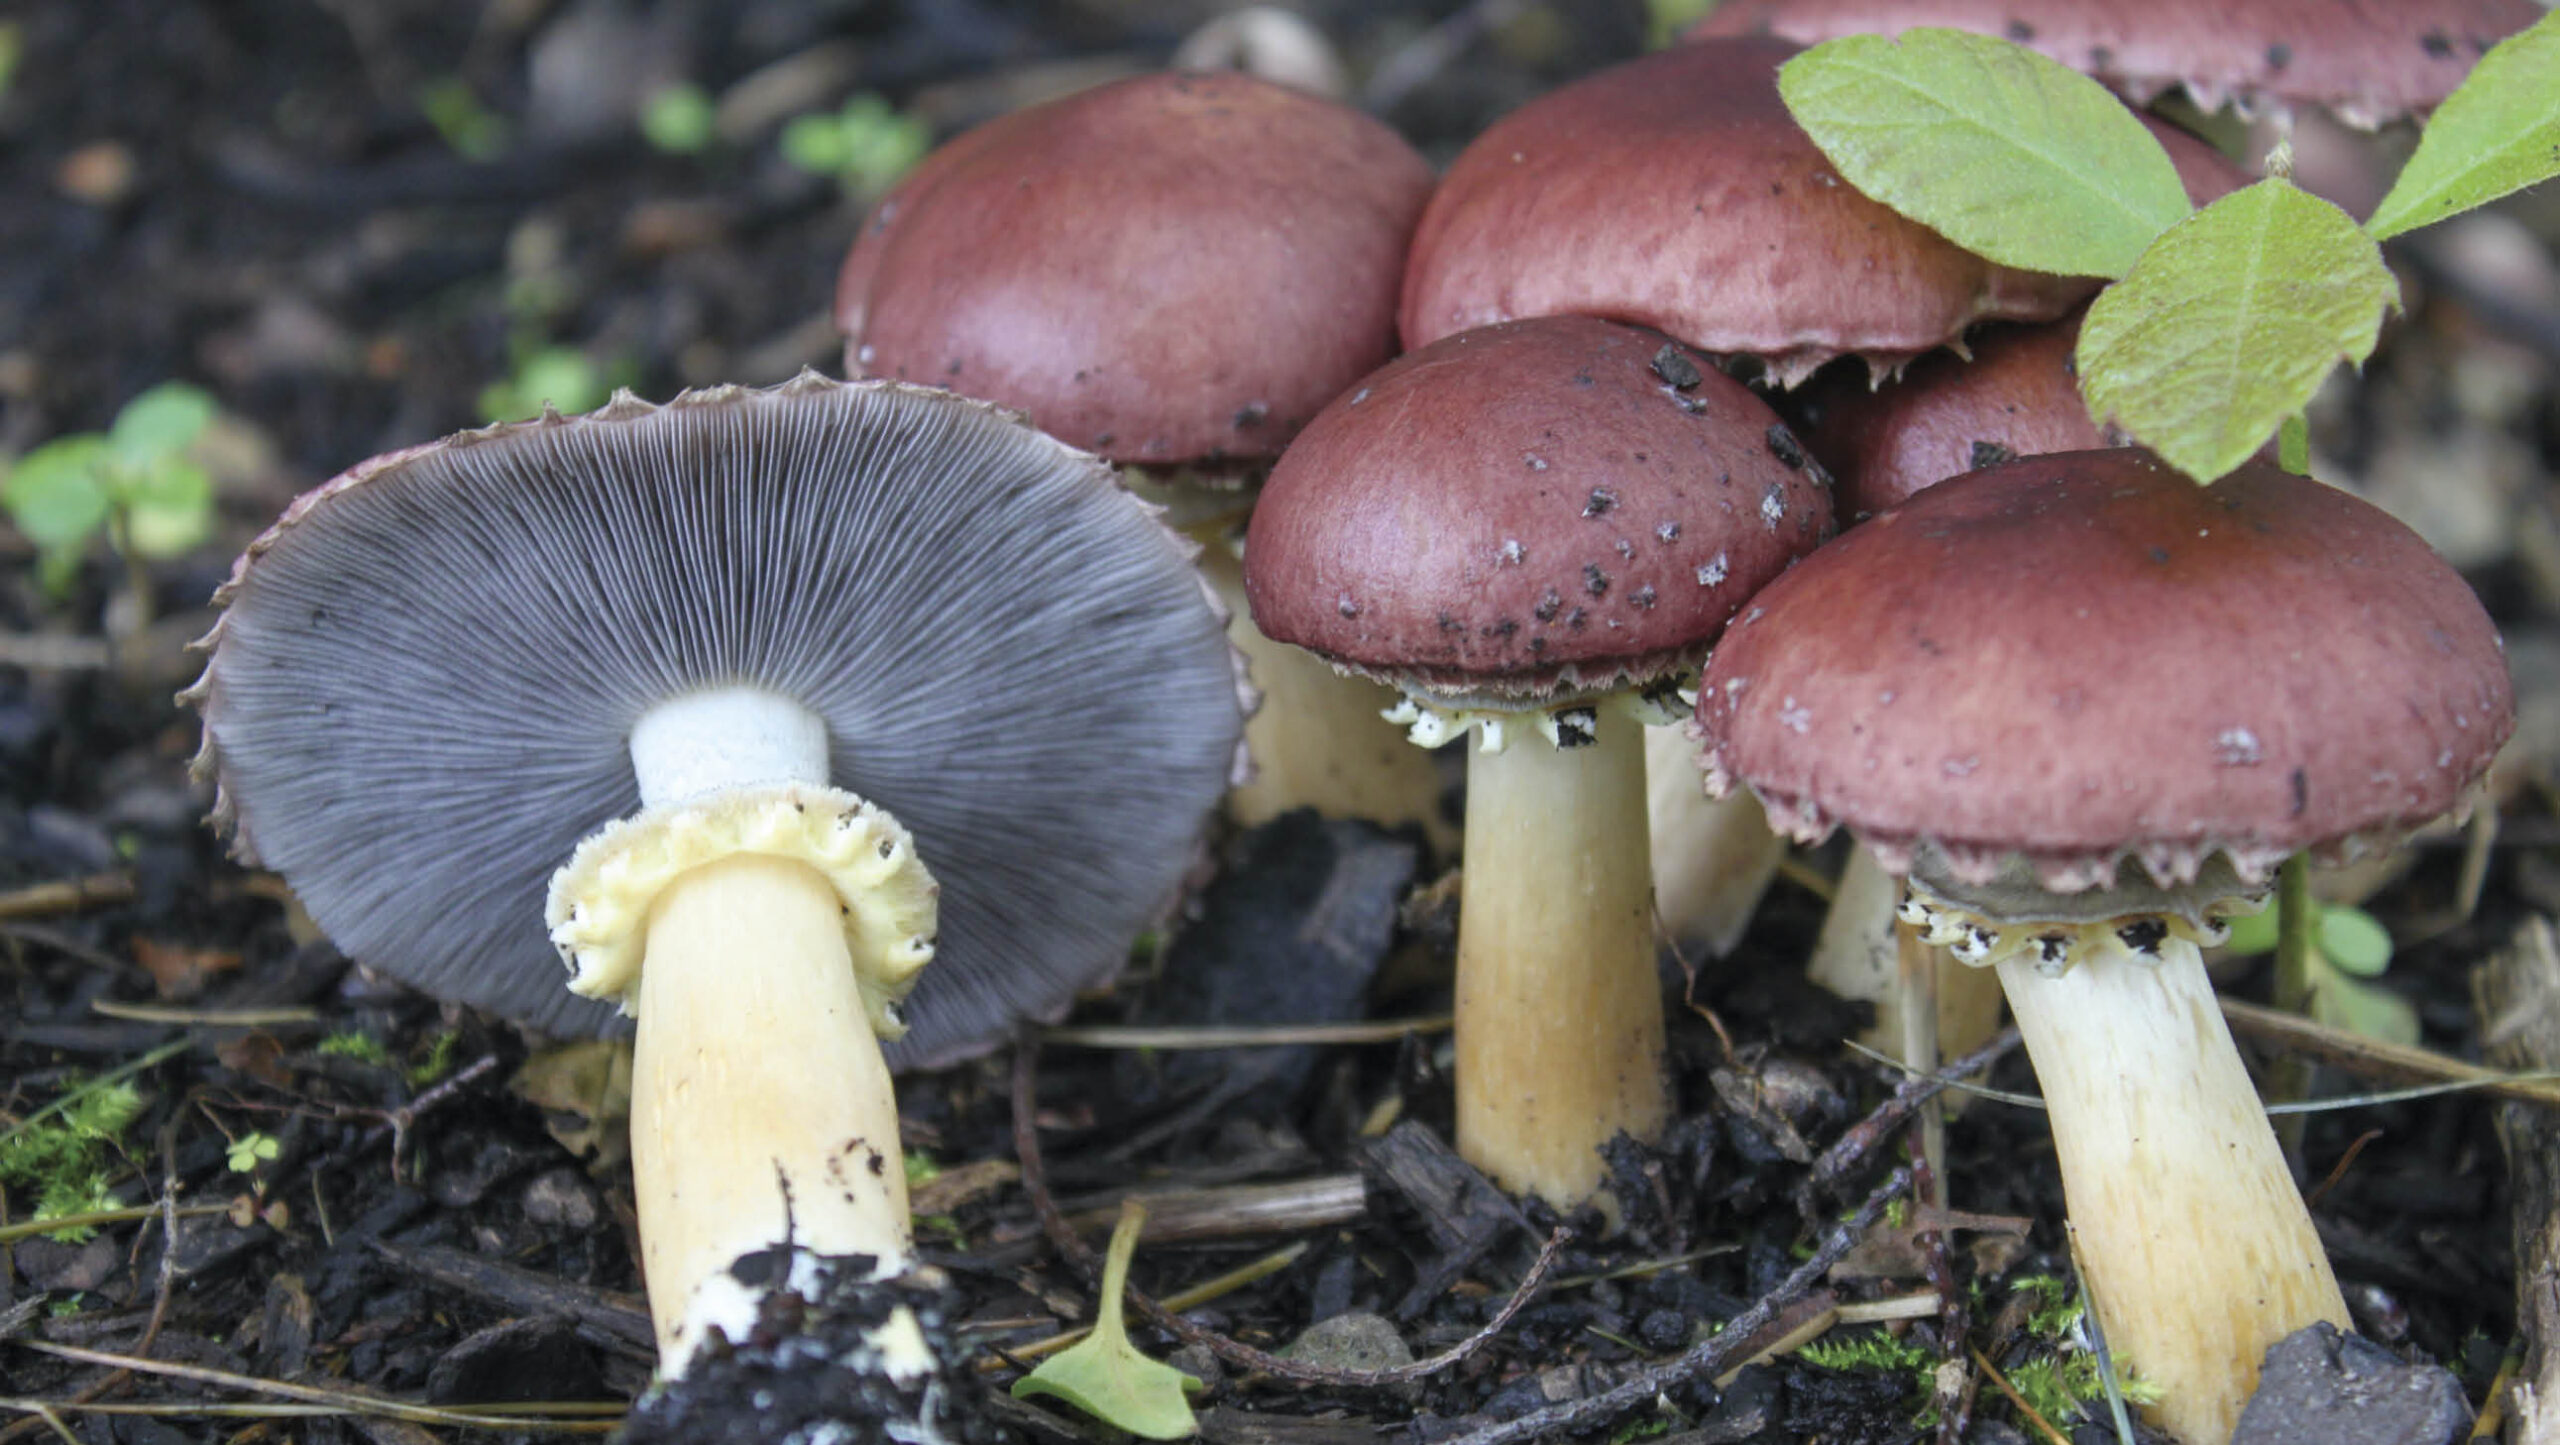 King stropharia are big and have a distinctive taste.